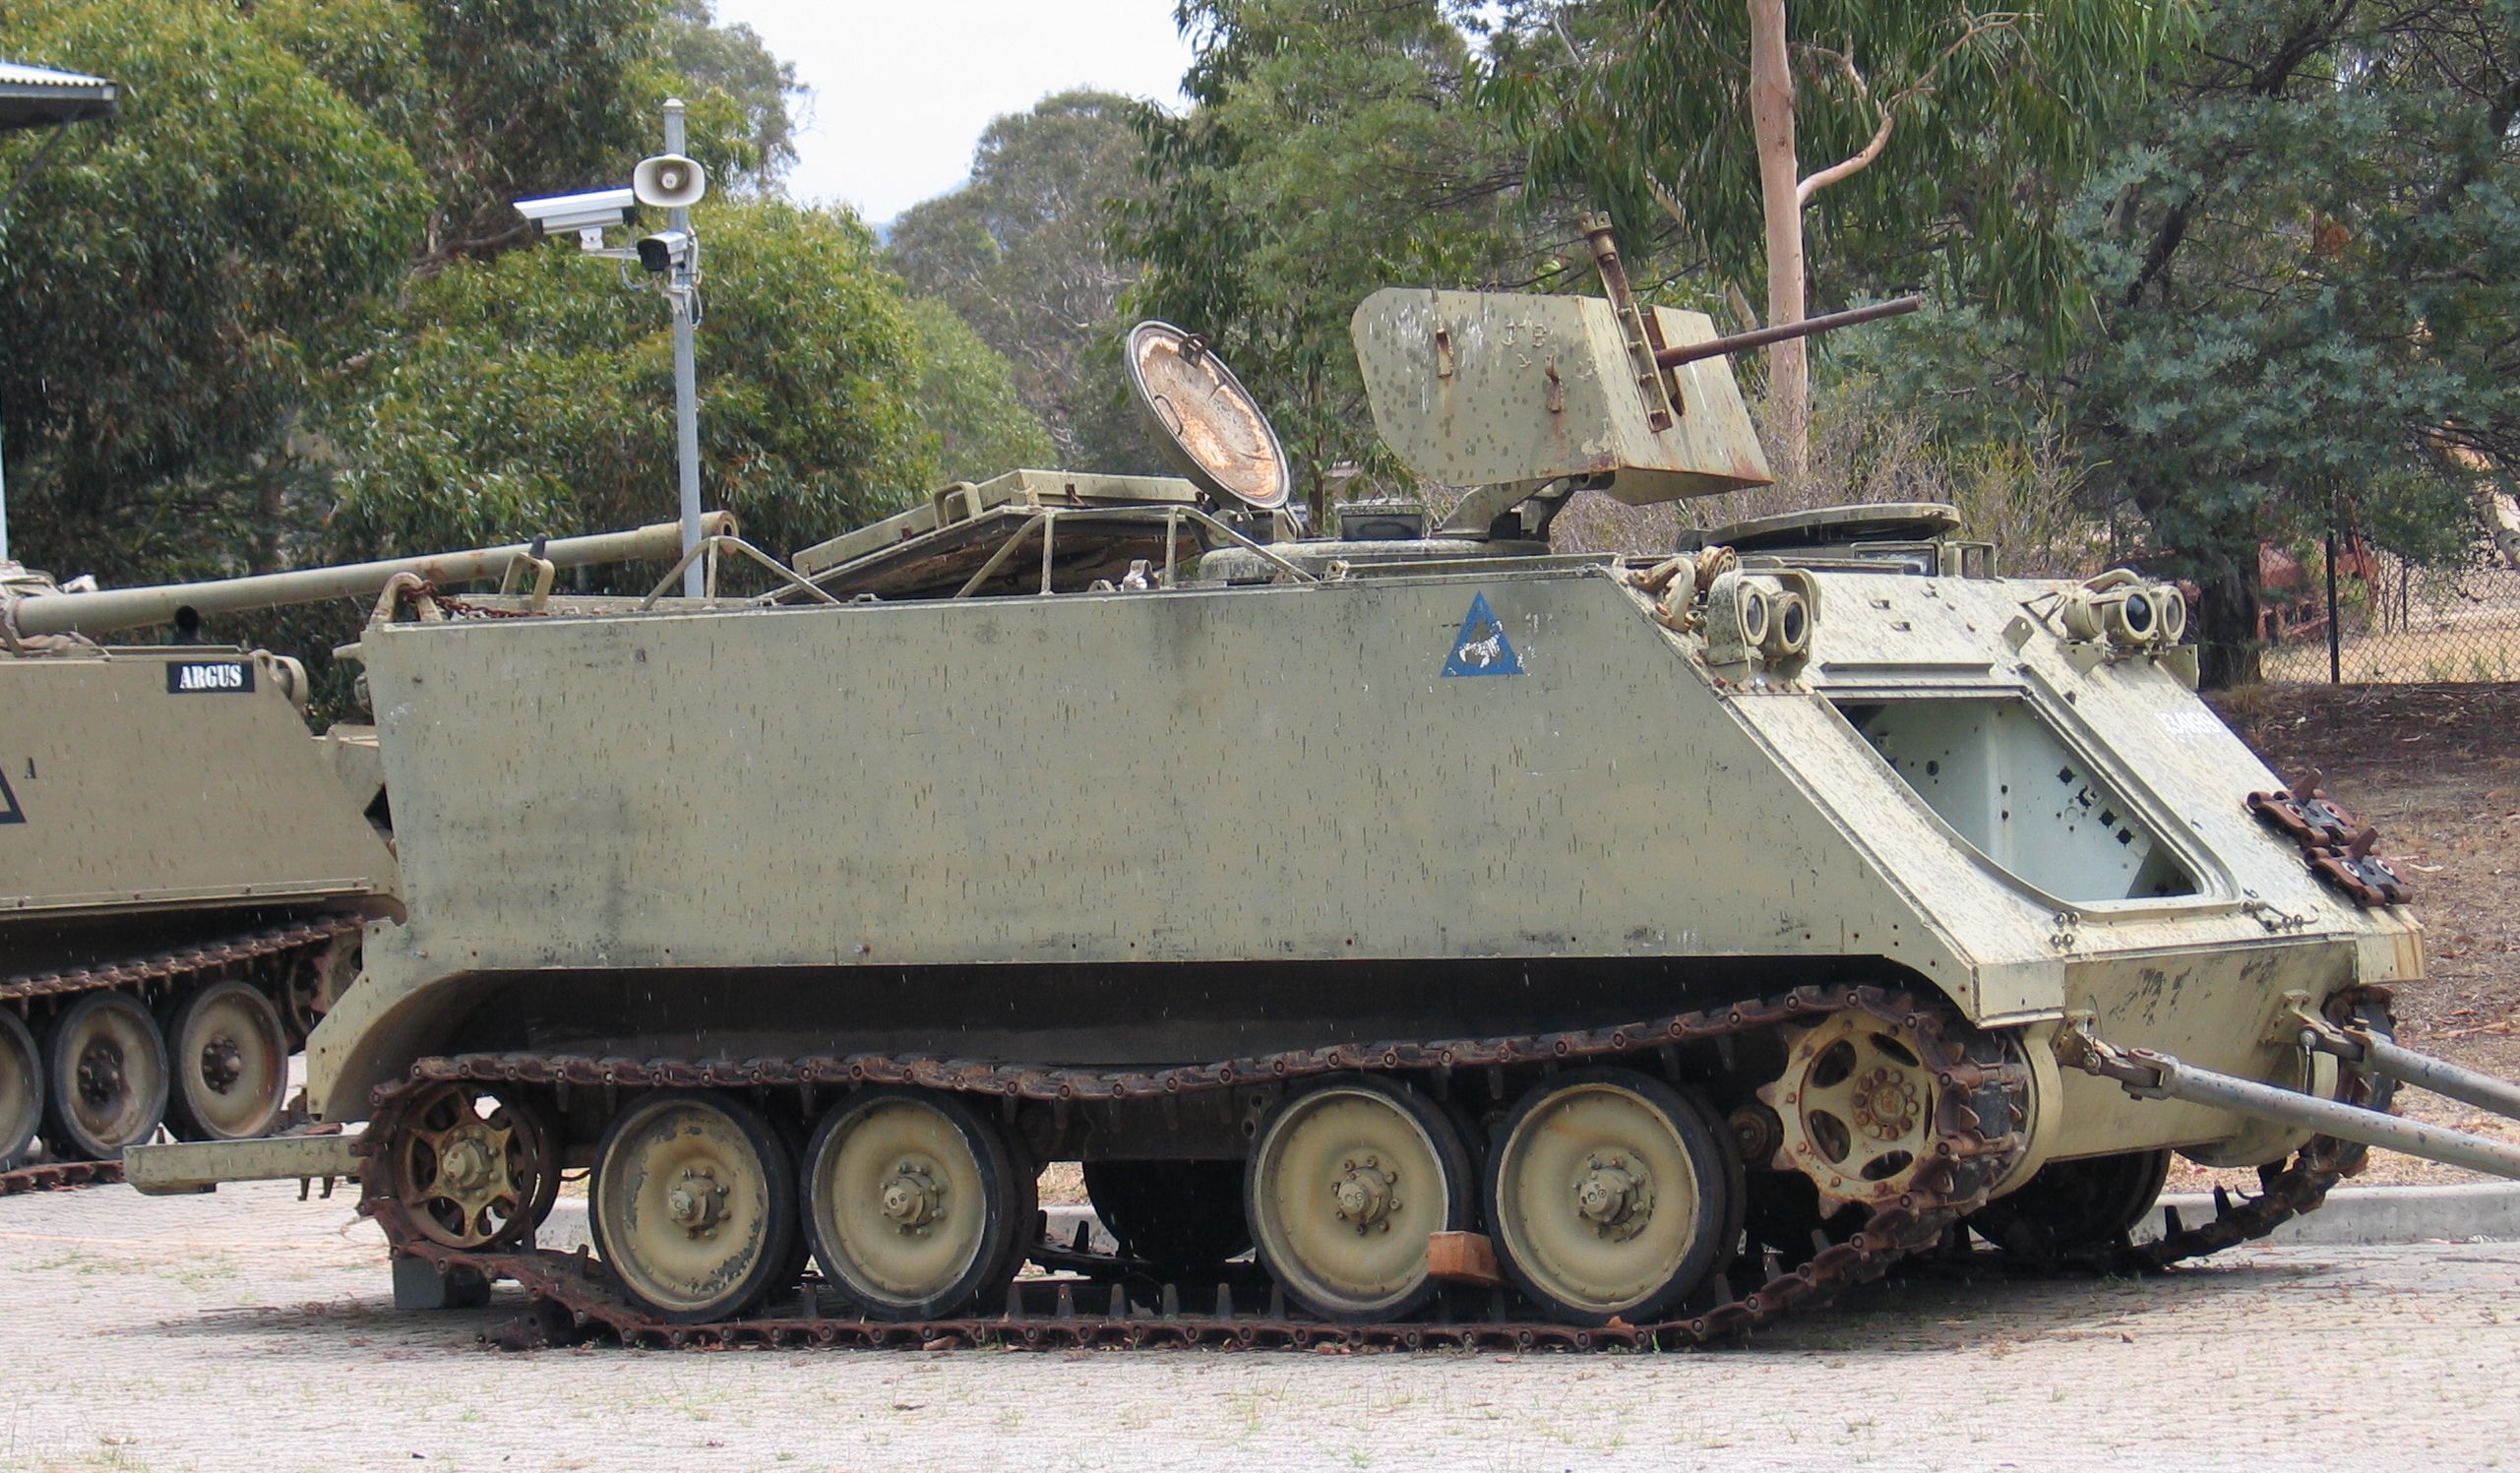 M113 Armored Personnel Carrier #3